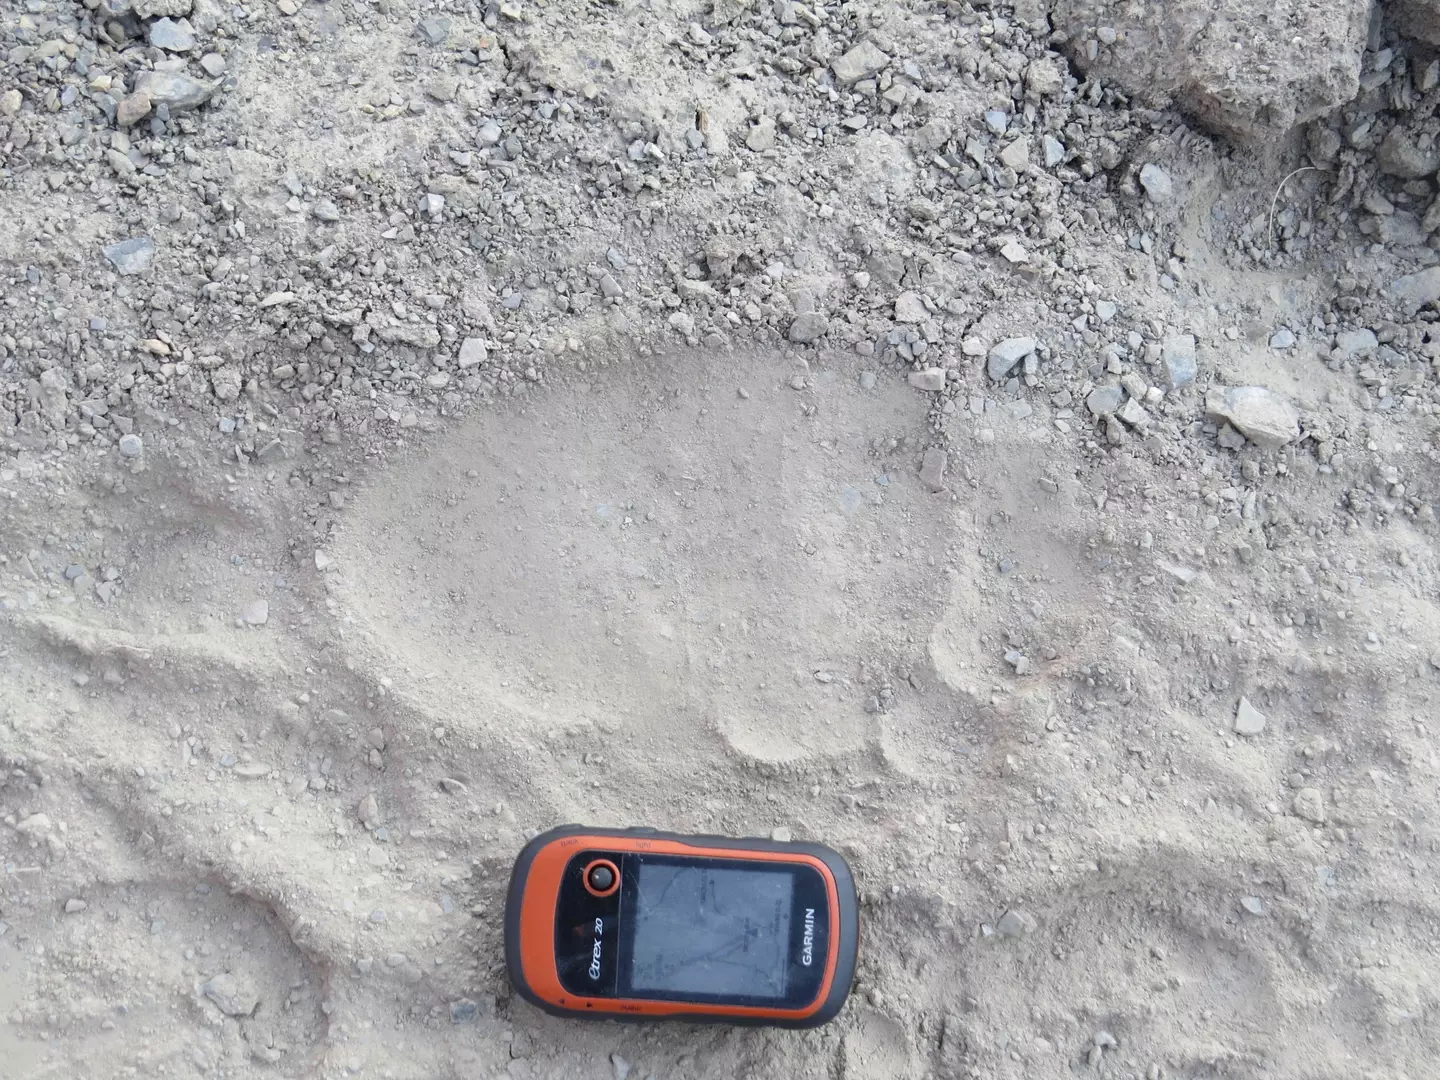 A footprint left by a large animal in Nepal.